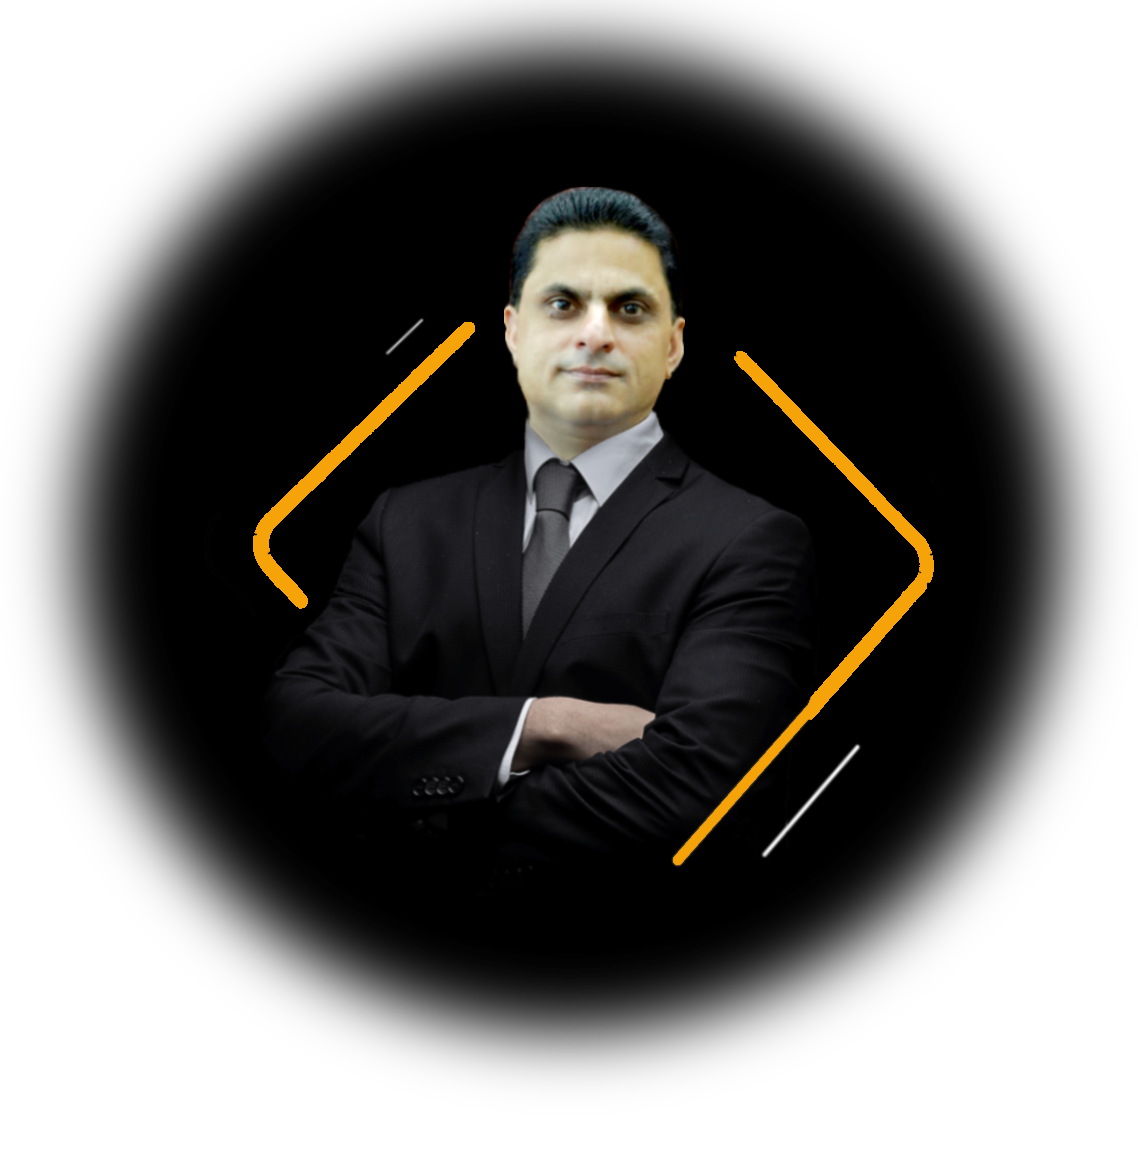 http://www.flyhawkrealestate.com/wp-content/uploads/2022/04/fly-hawk-real-estate-md-sajid-iqbal.png